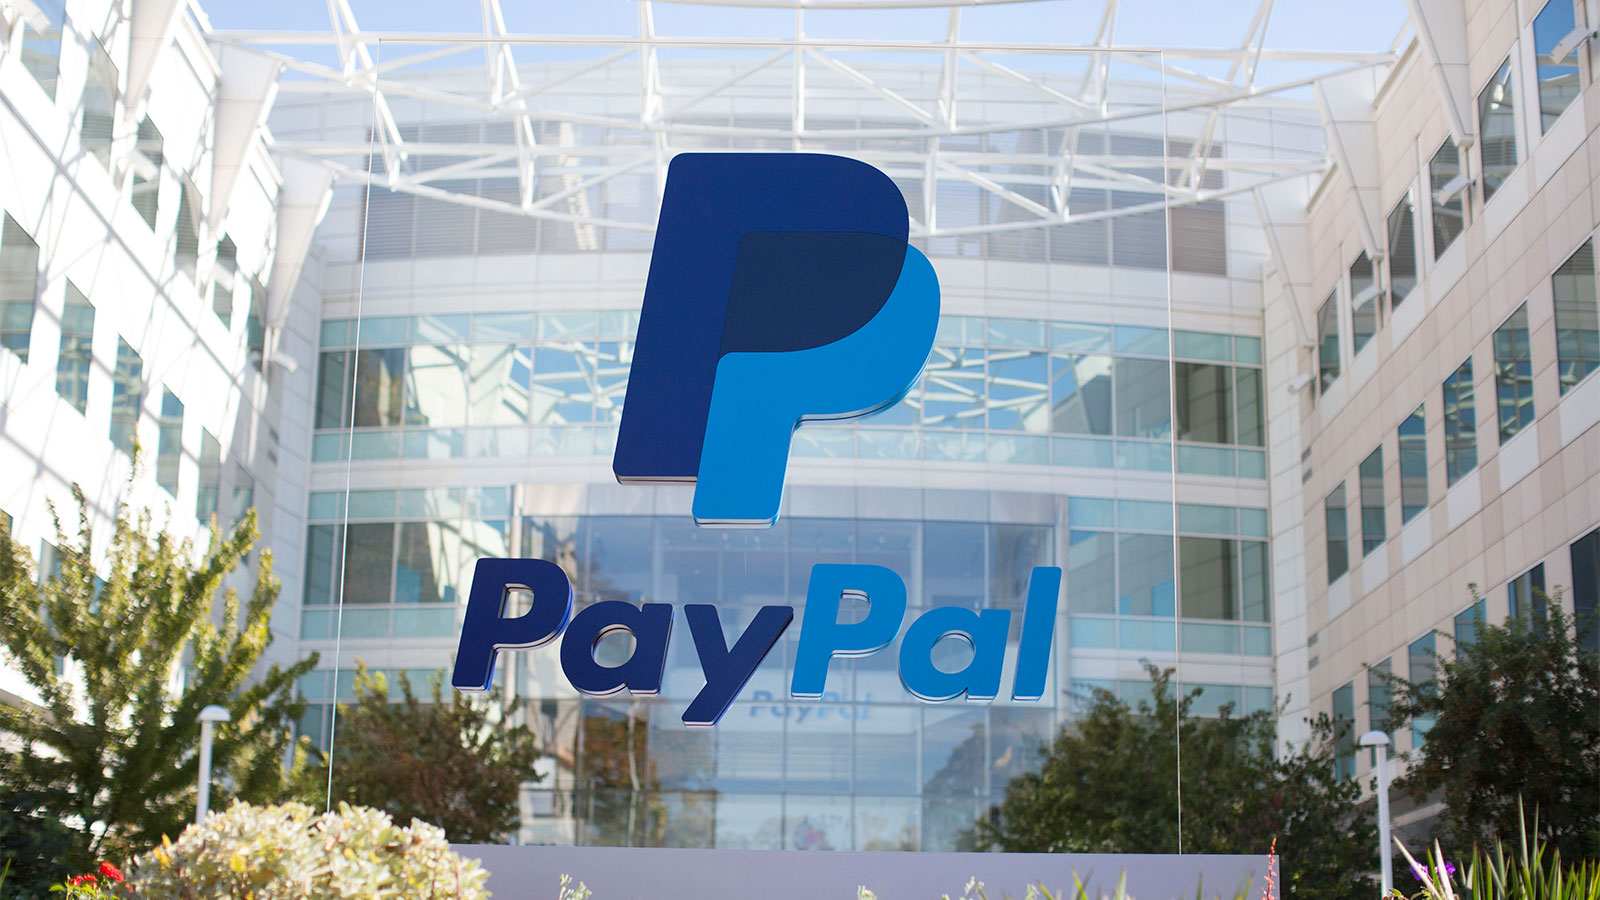 contact phone number for paypal customer service